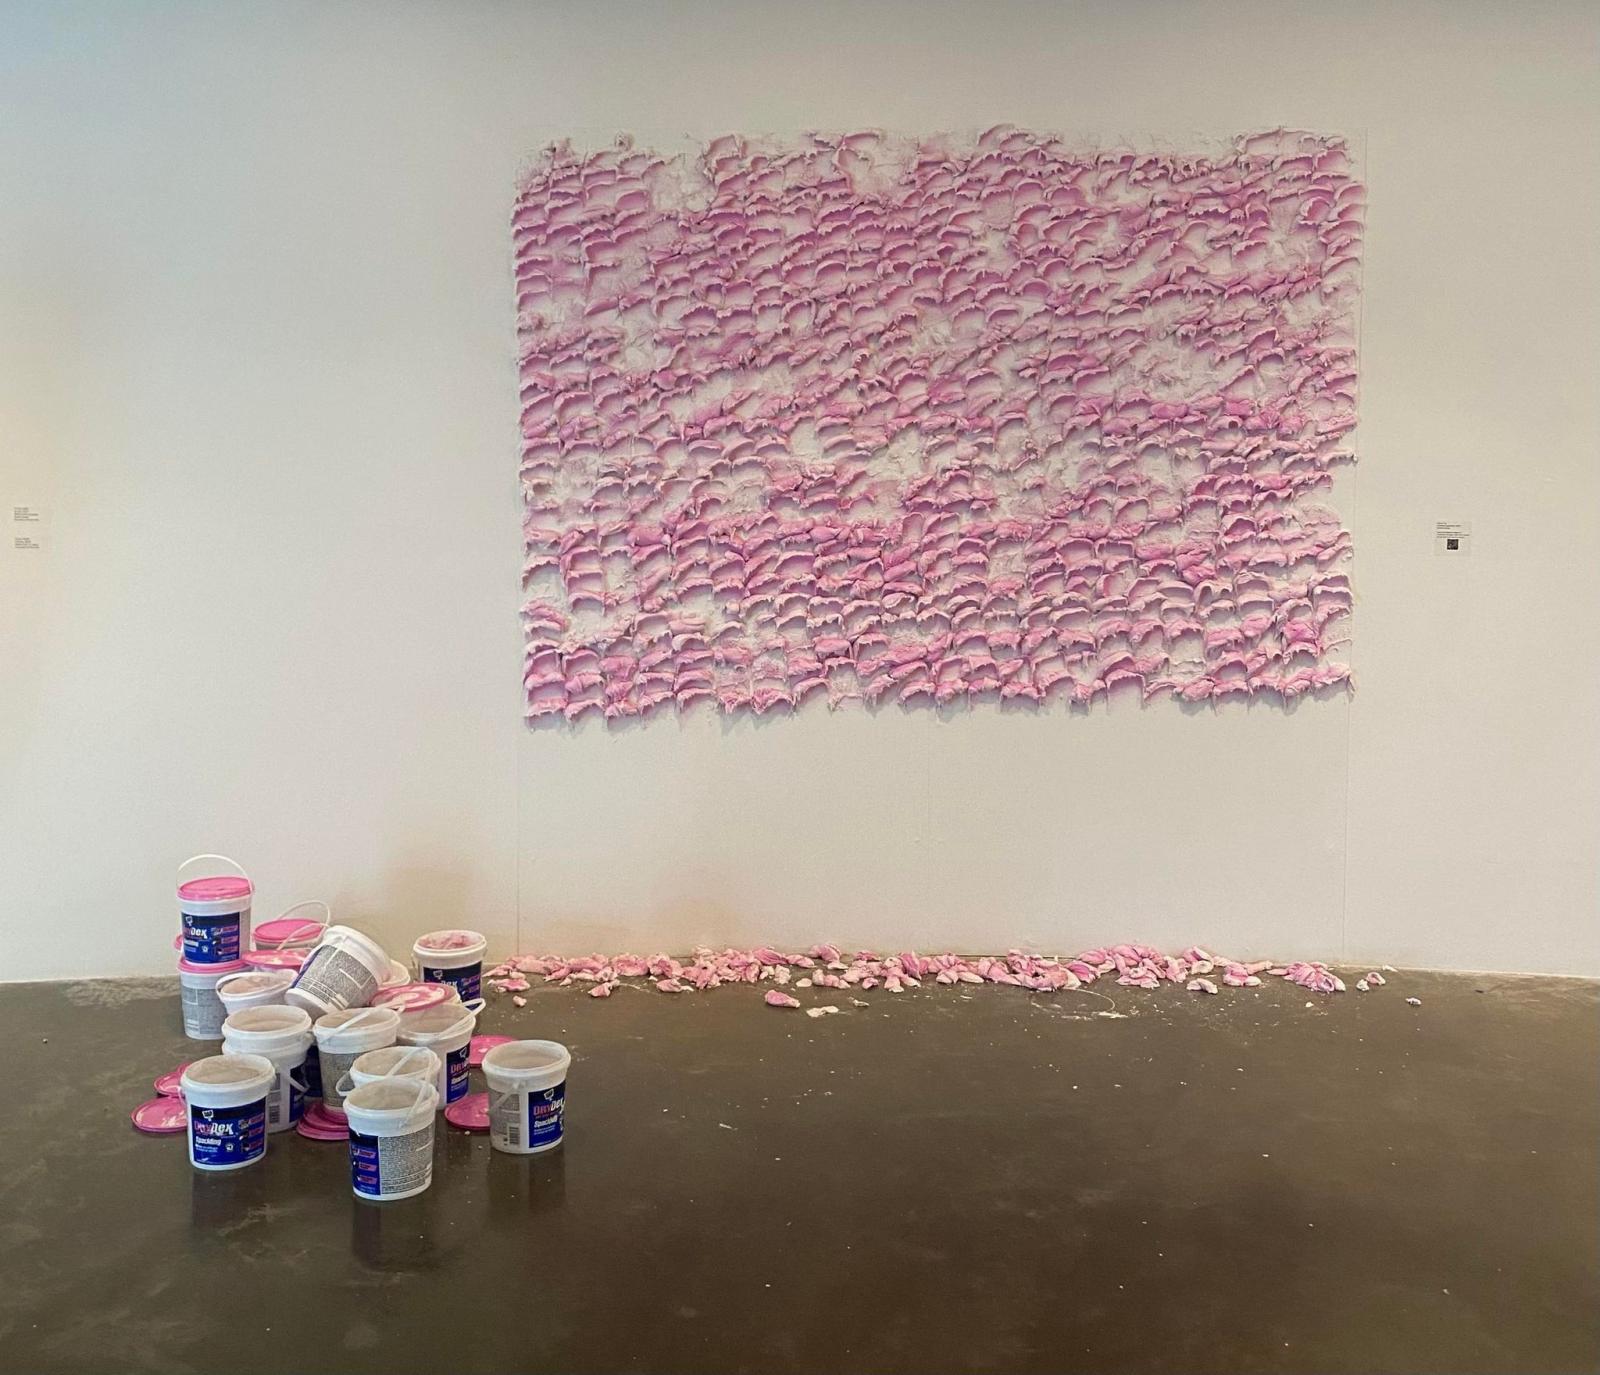 This image is an overal snapshot of material changes over the course of the 120 hour performance using Spackle as the main medium.  
http://naomile.weebly.com/spackle-material-changes.html

Follow the link for the whole duration of the material change. 